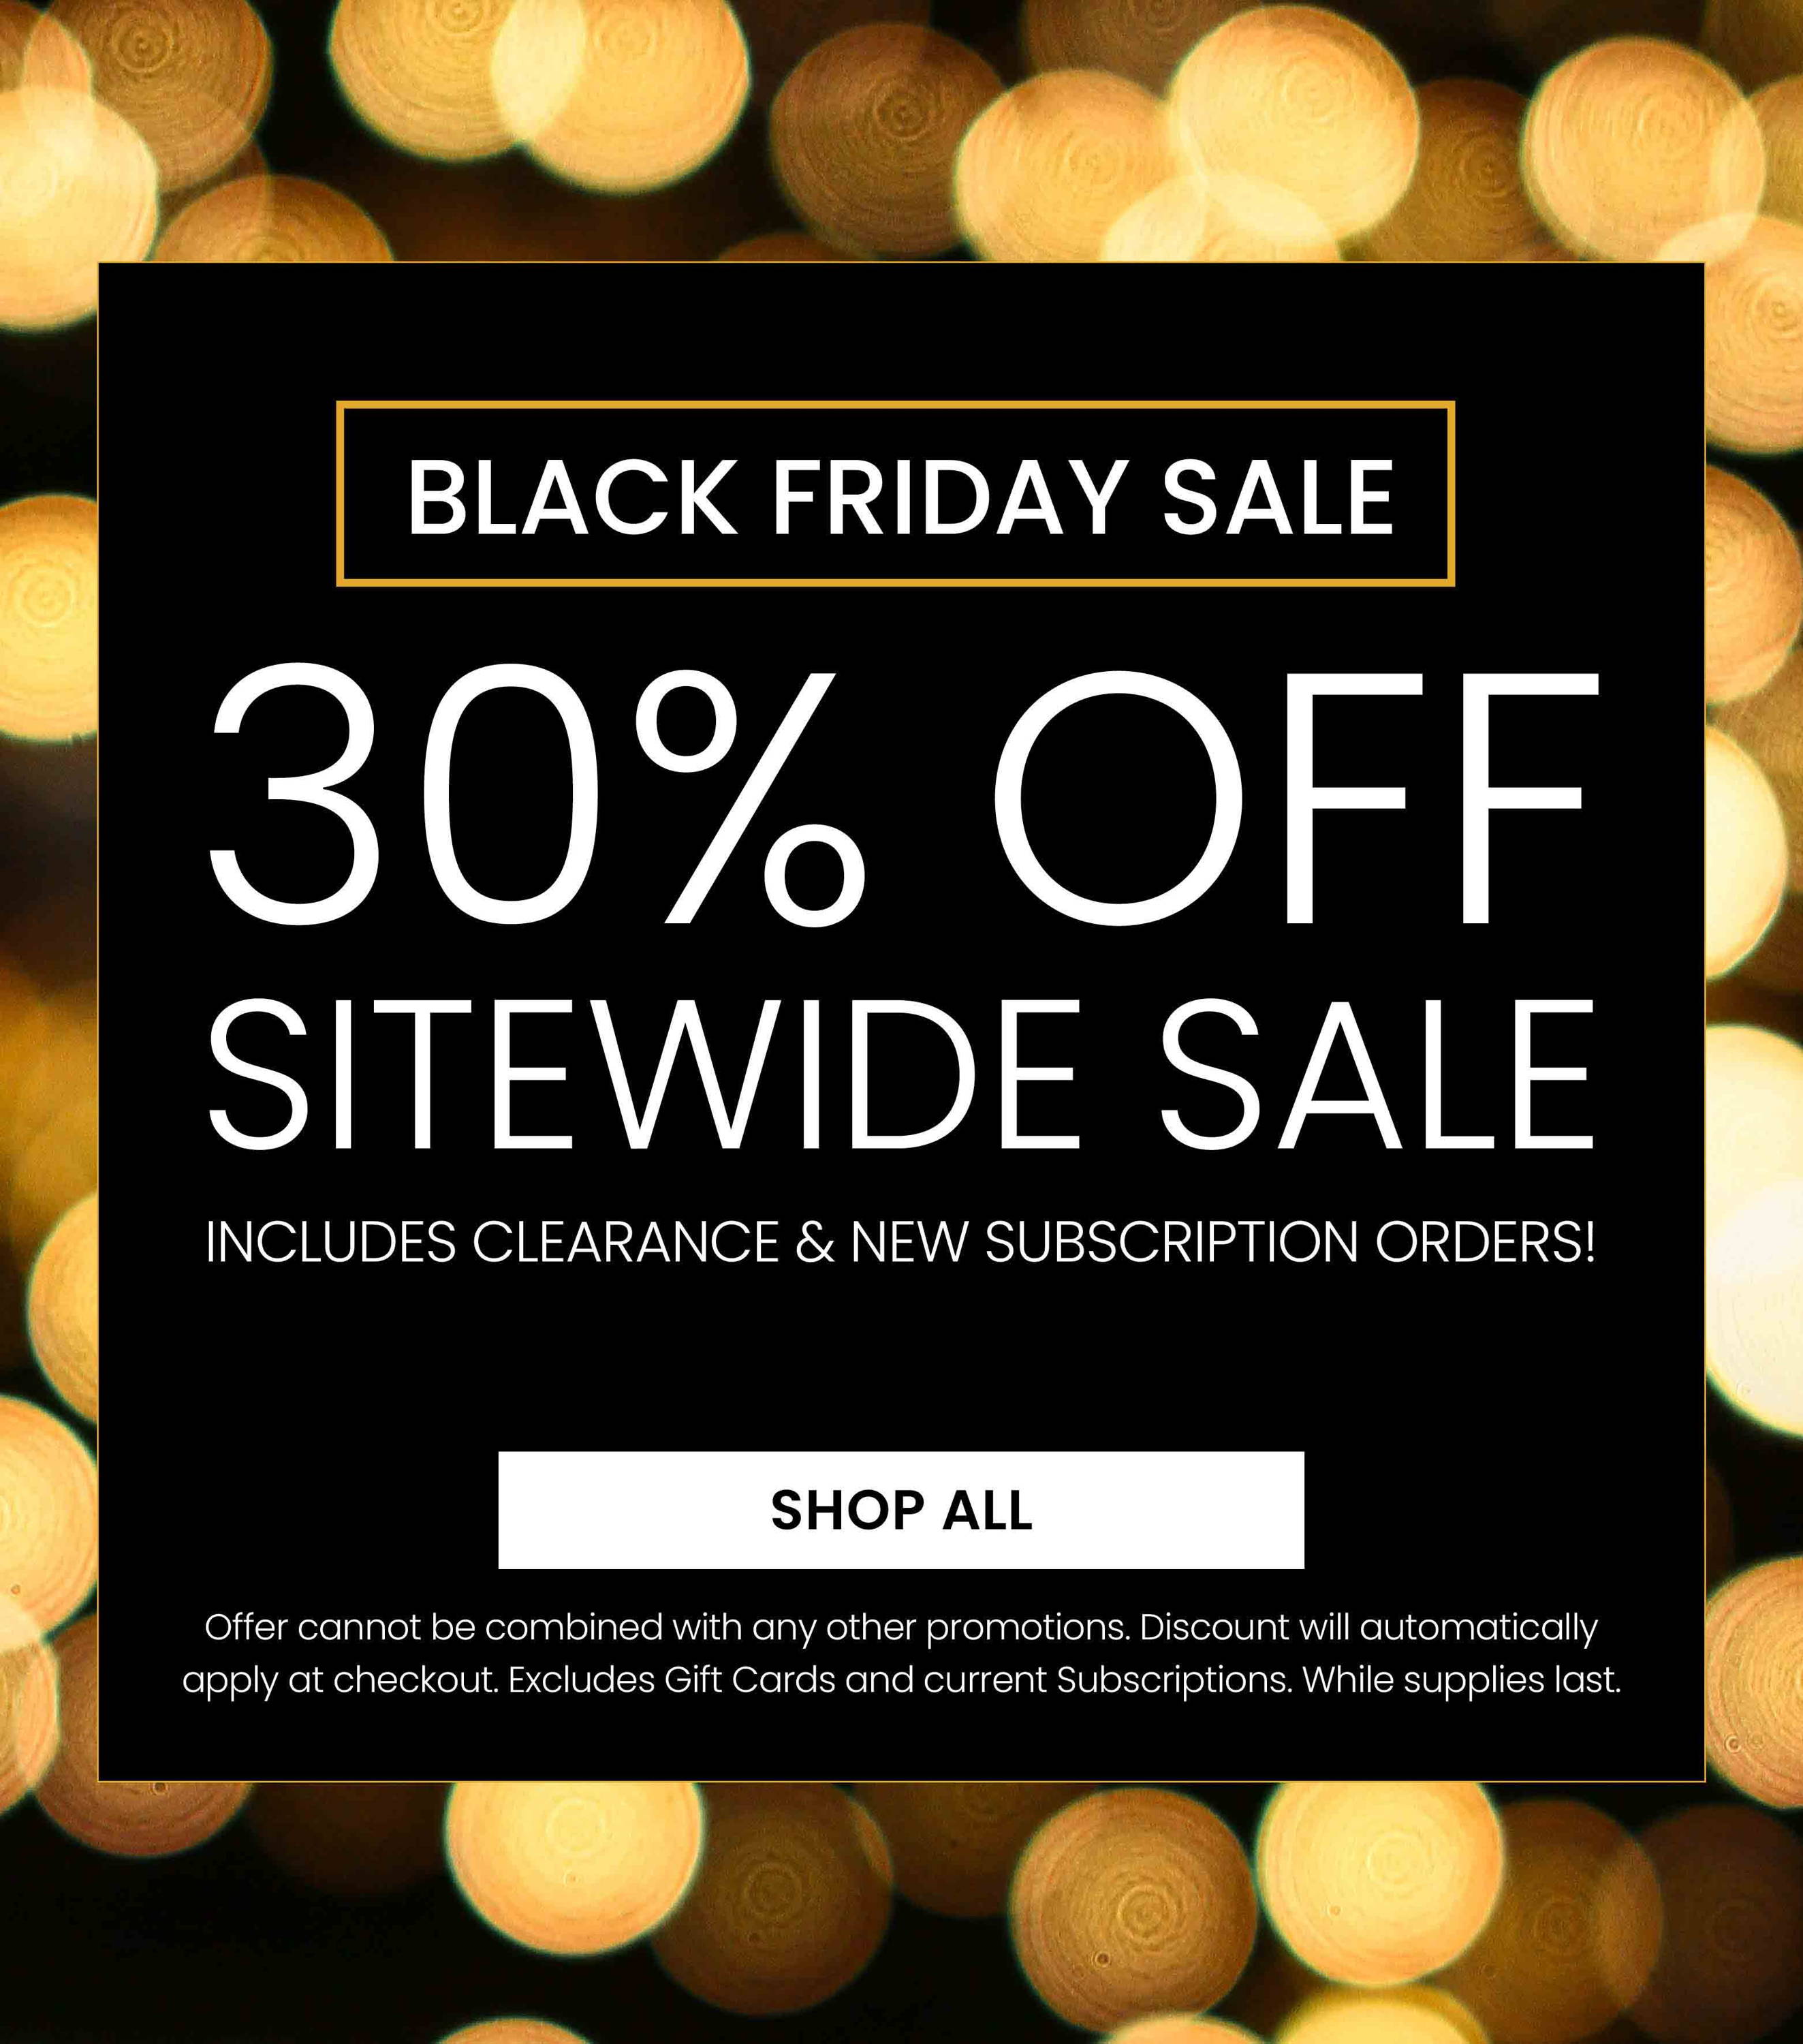  Black Friday Sale. 30% Off Sitewide Sale. Includes Clearance and New Subscriptions.